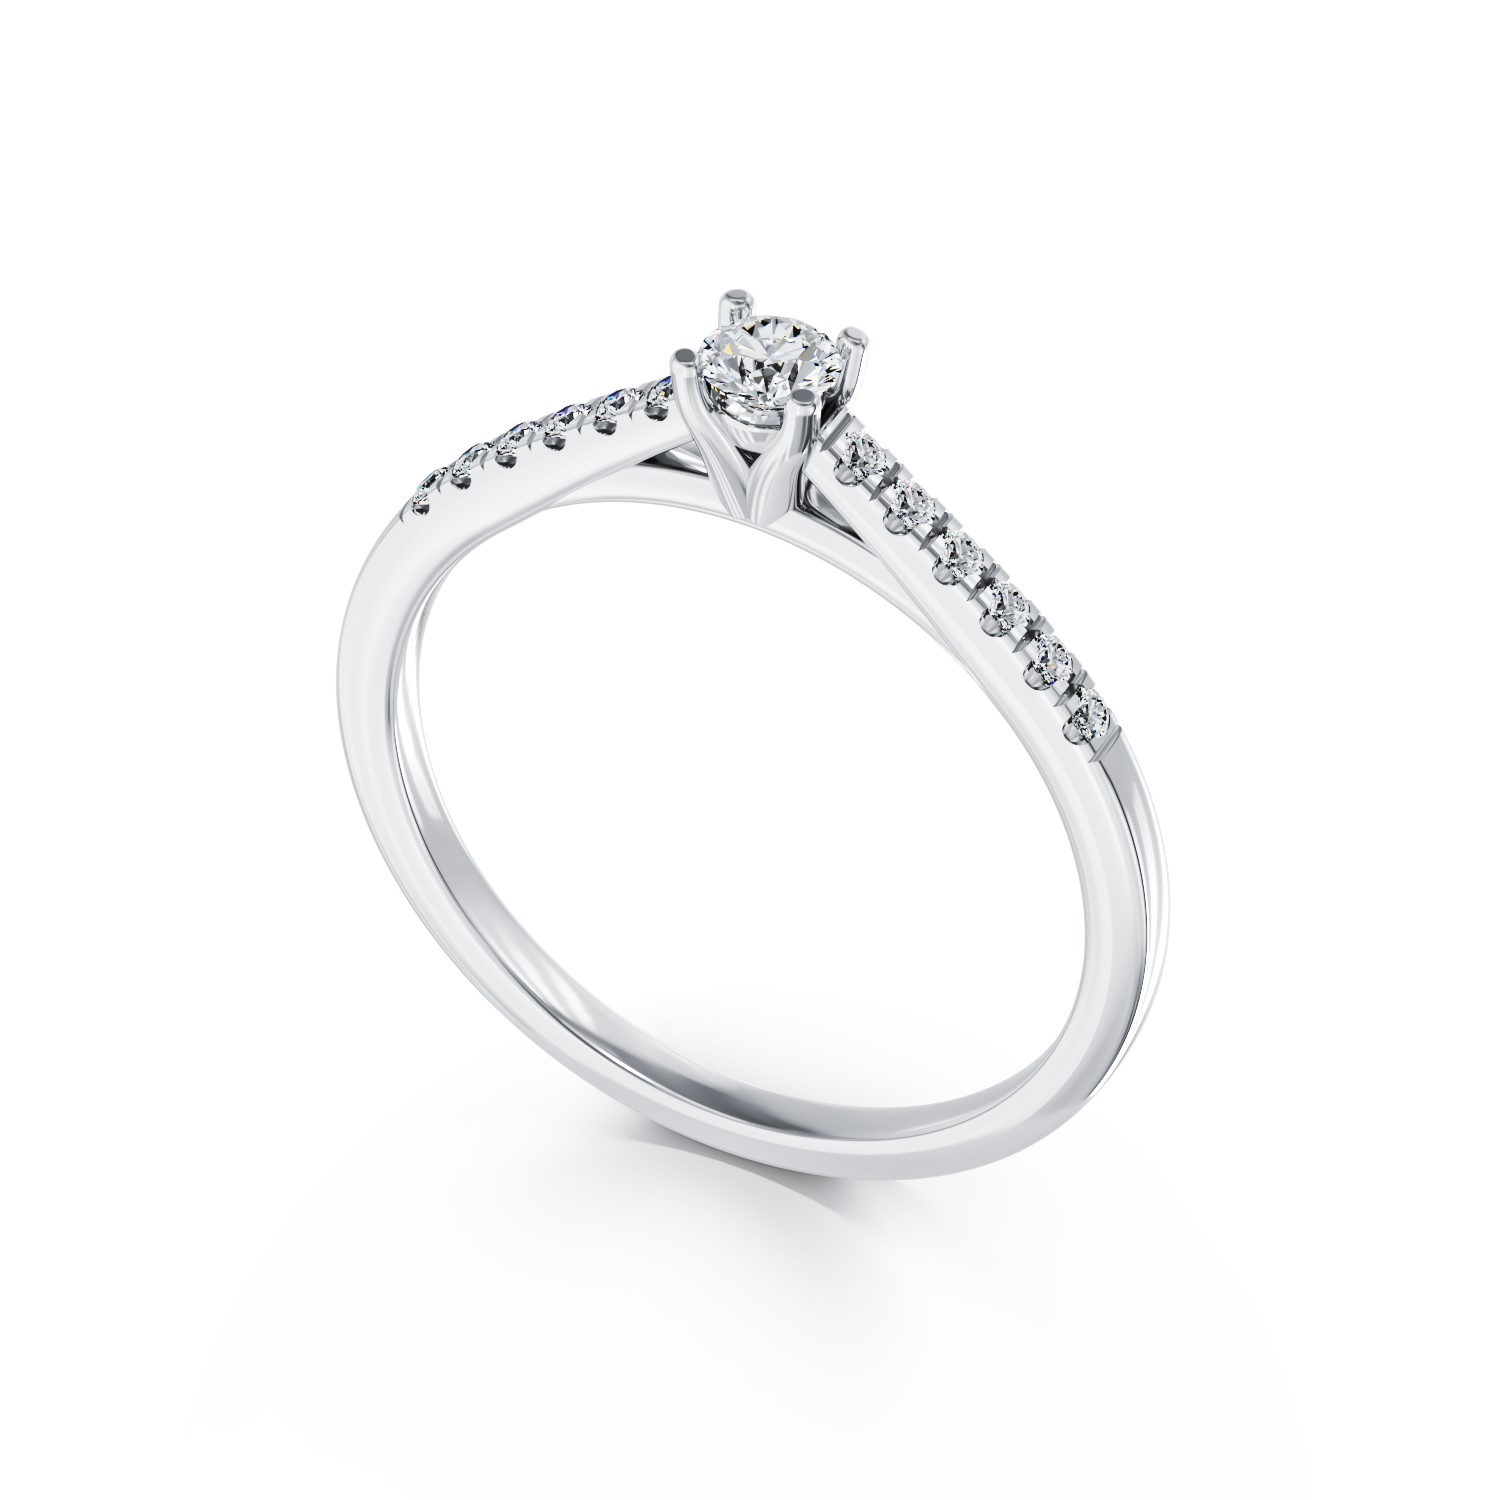 18K white gold engagement ring with 0.3ct diamond and 0.13ct diamonds